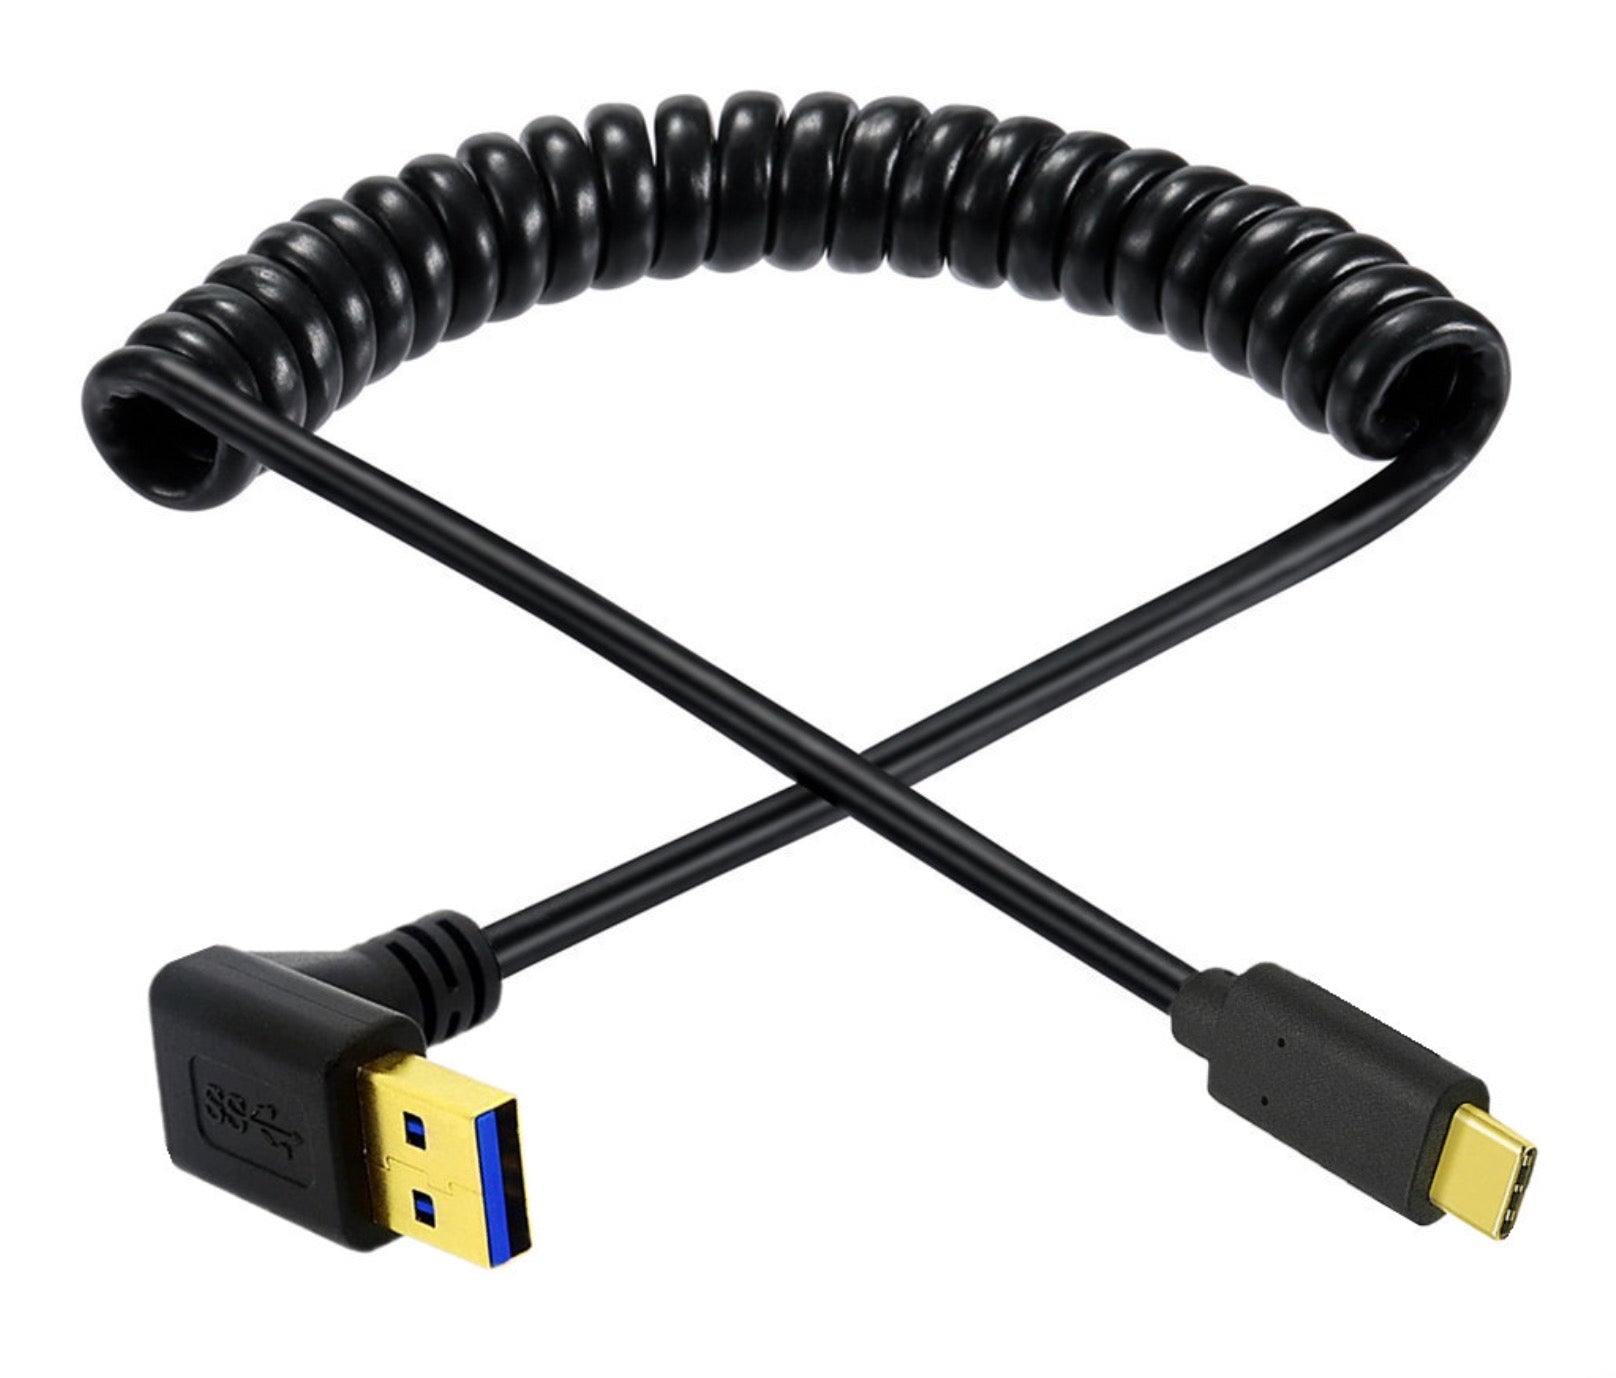 USB C Type-C Male to USB 3.0 A Type Male Coiled Cable - Up Angle